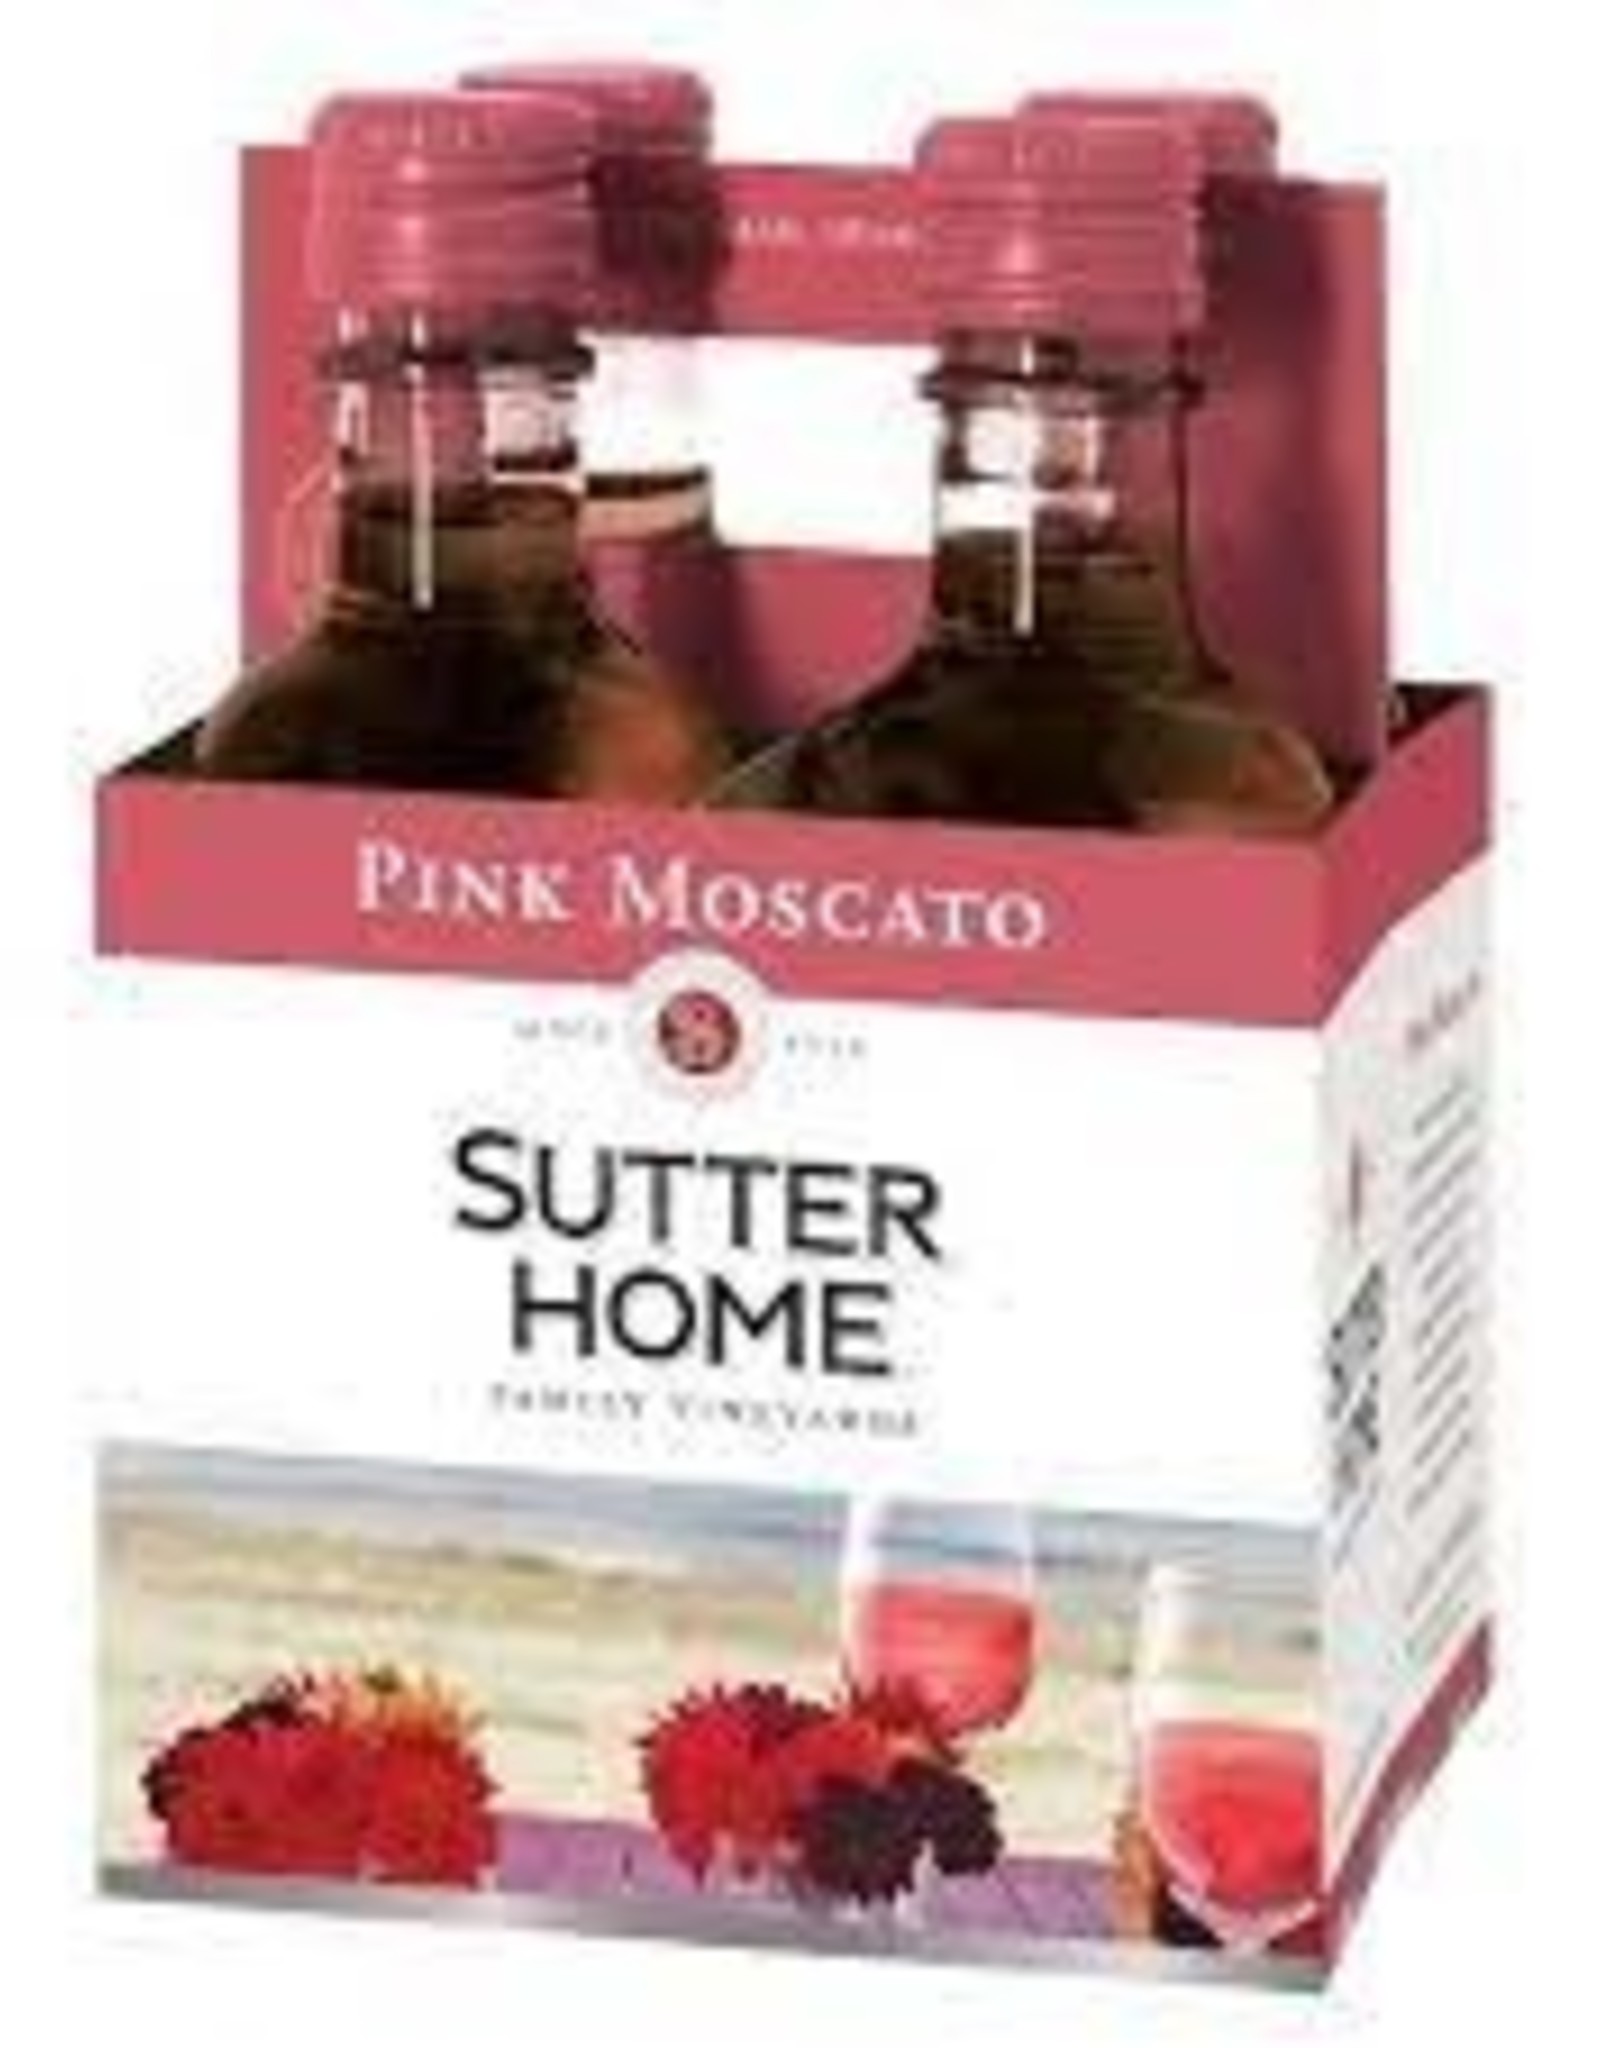 Sutter Home Pink Moscato 187ml 4pk